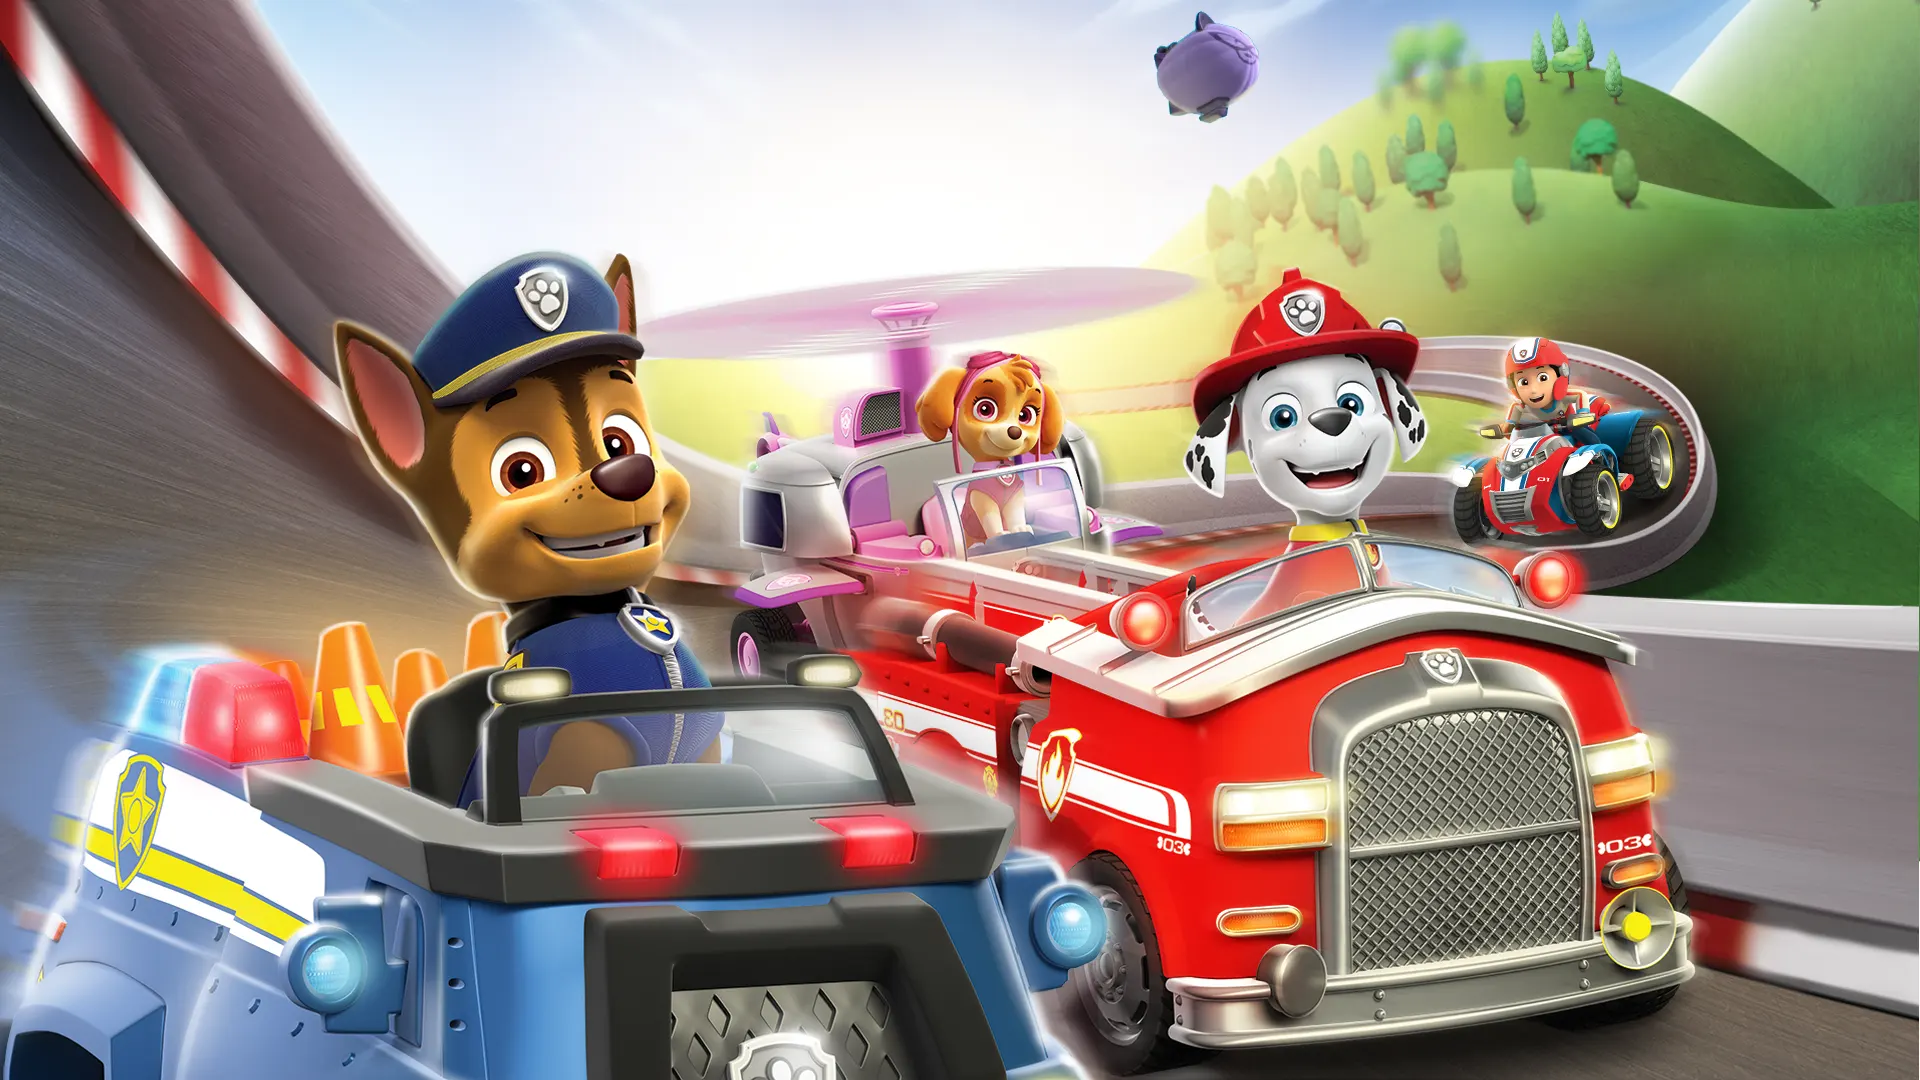 Paw Patrol - Action Figures & Accessories